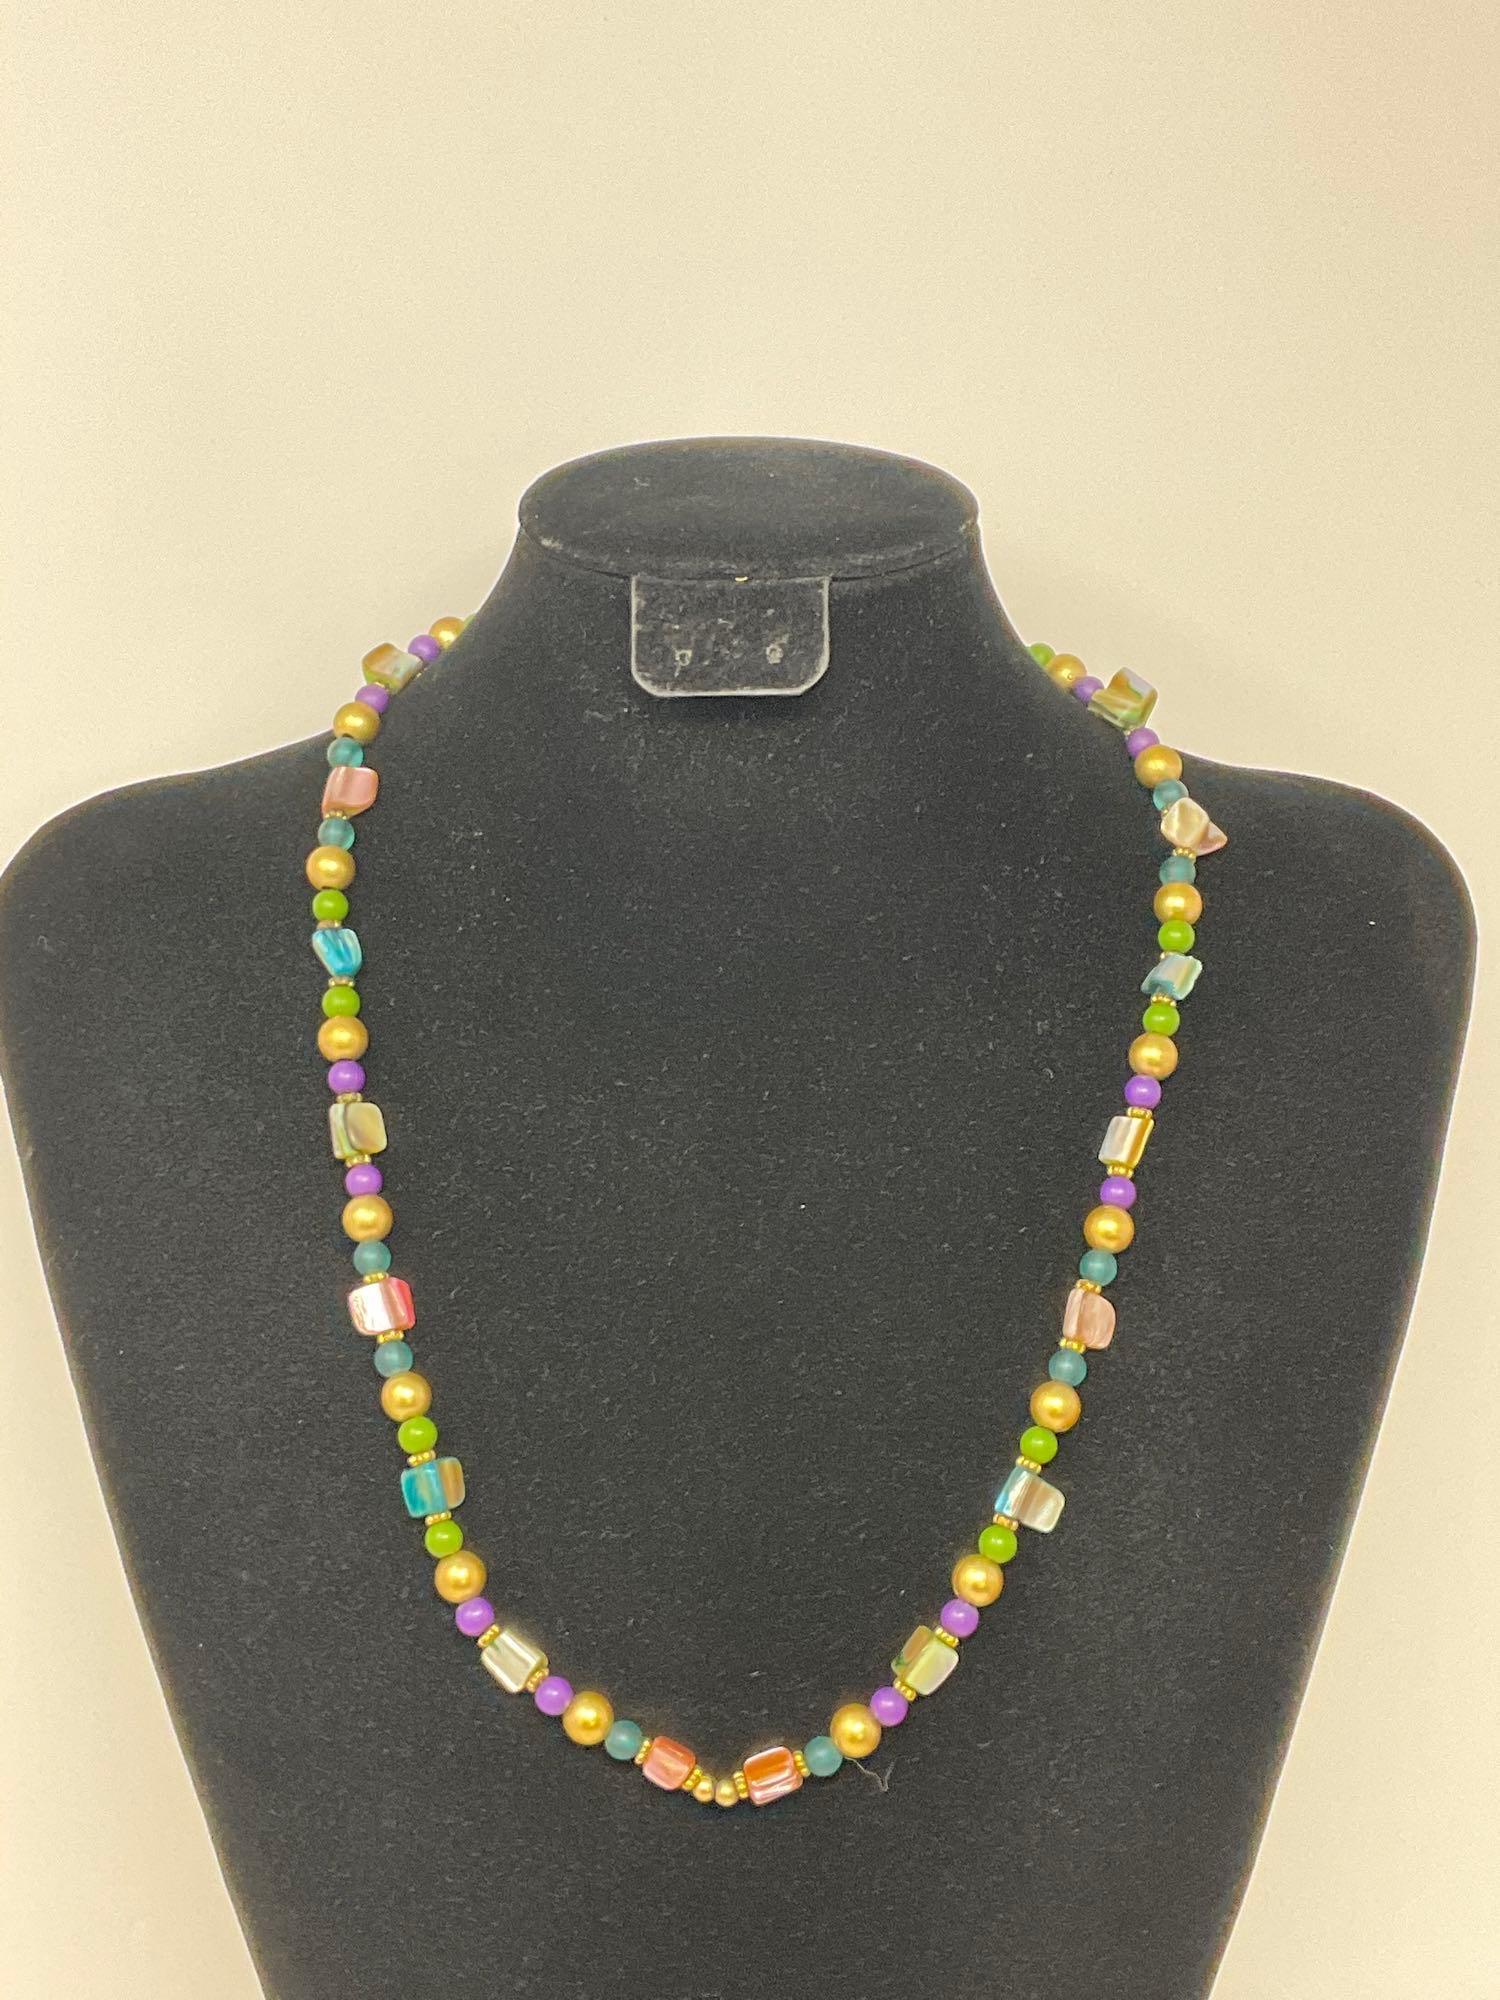 Beaded necklaces and bracelets